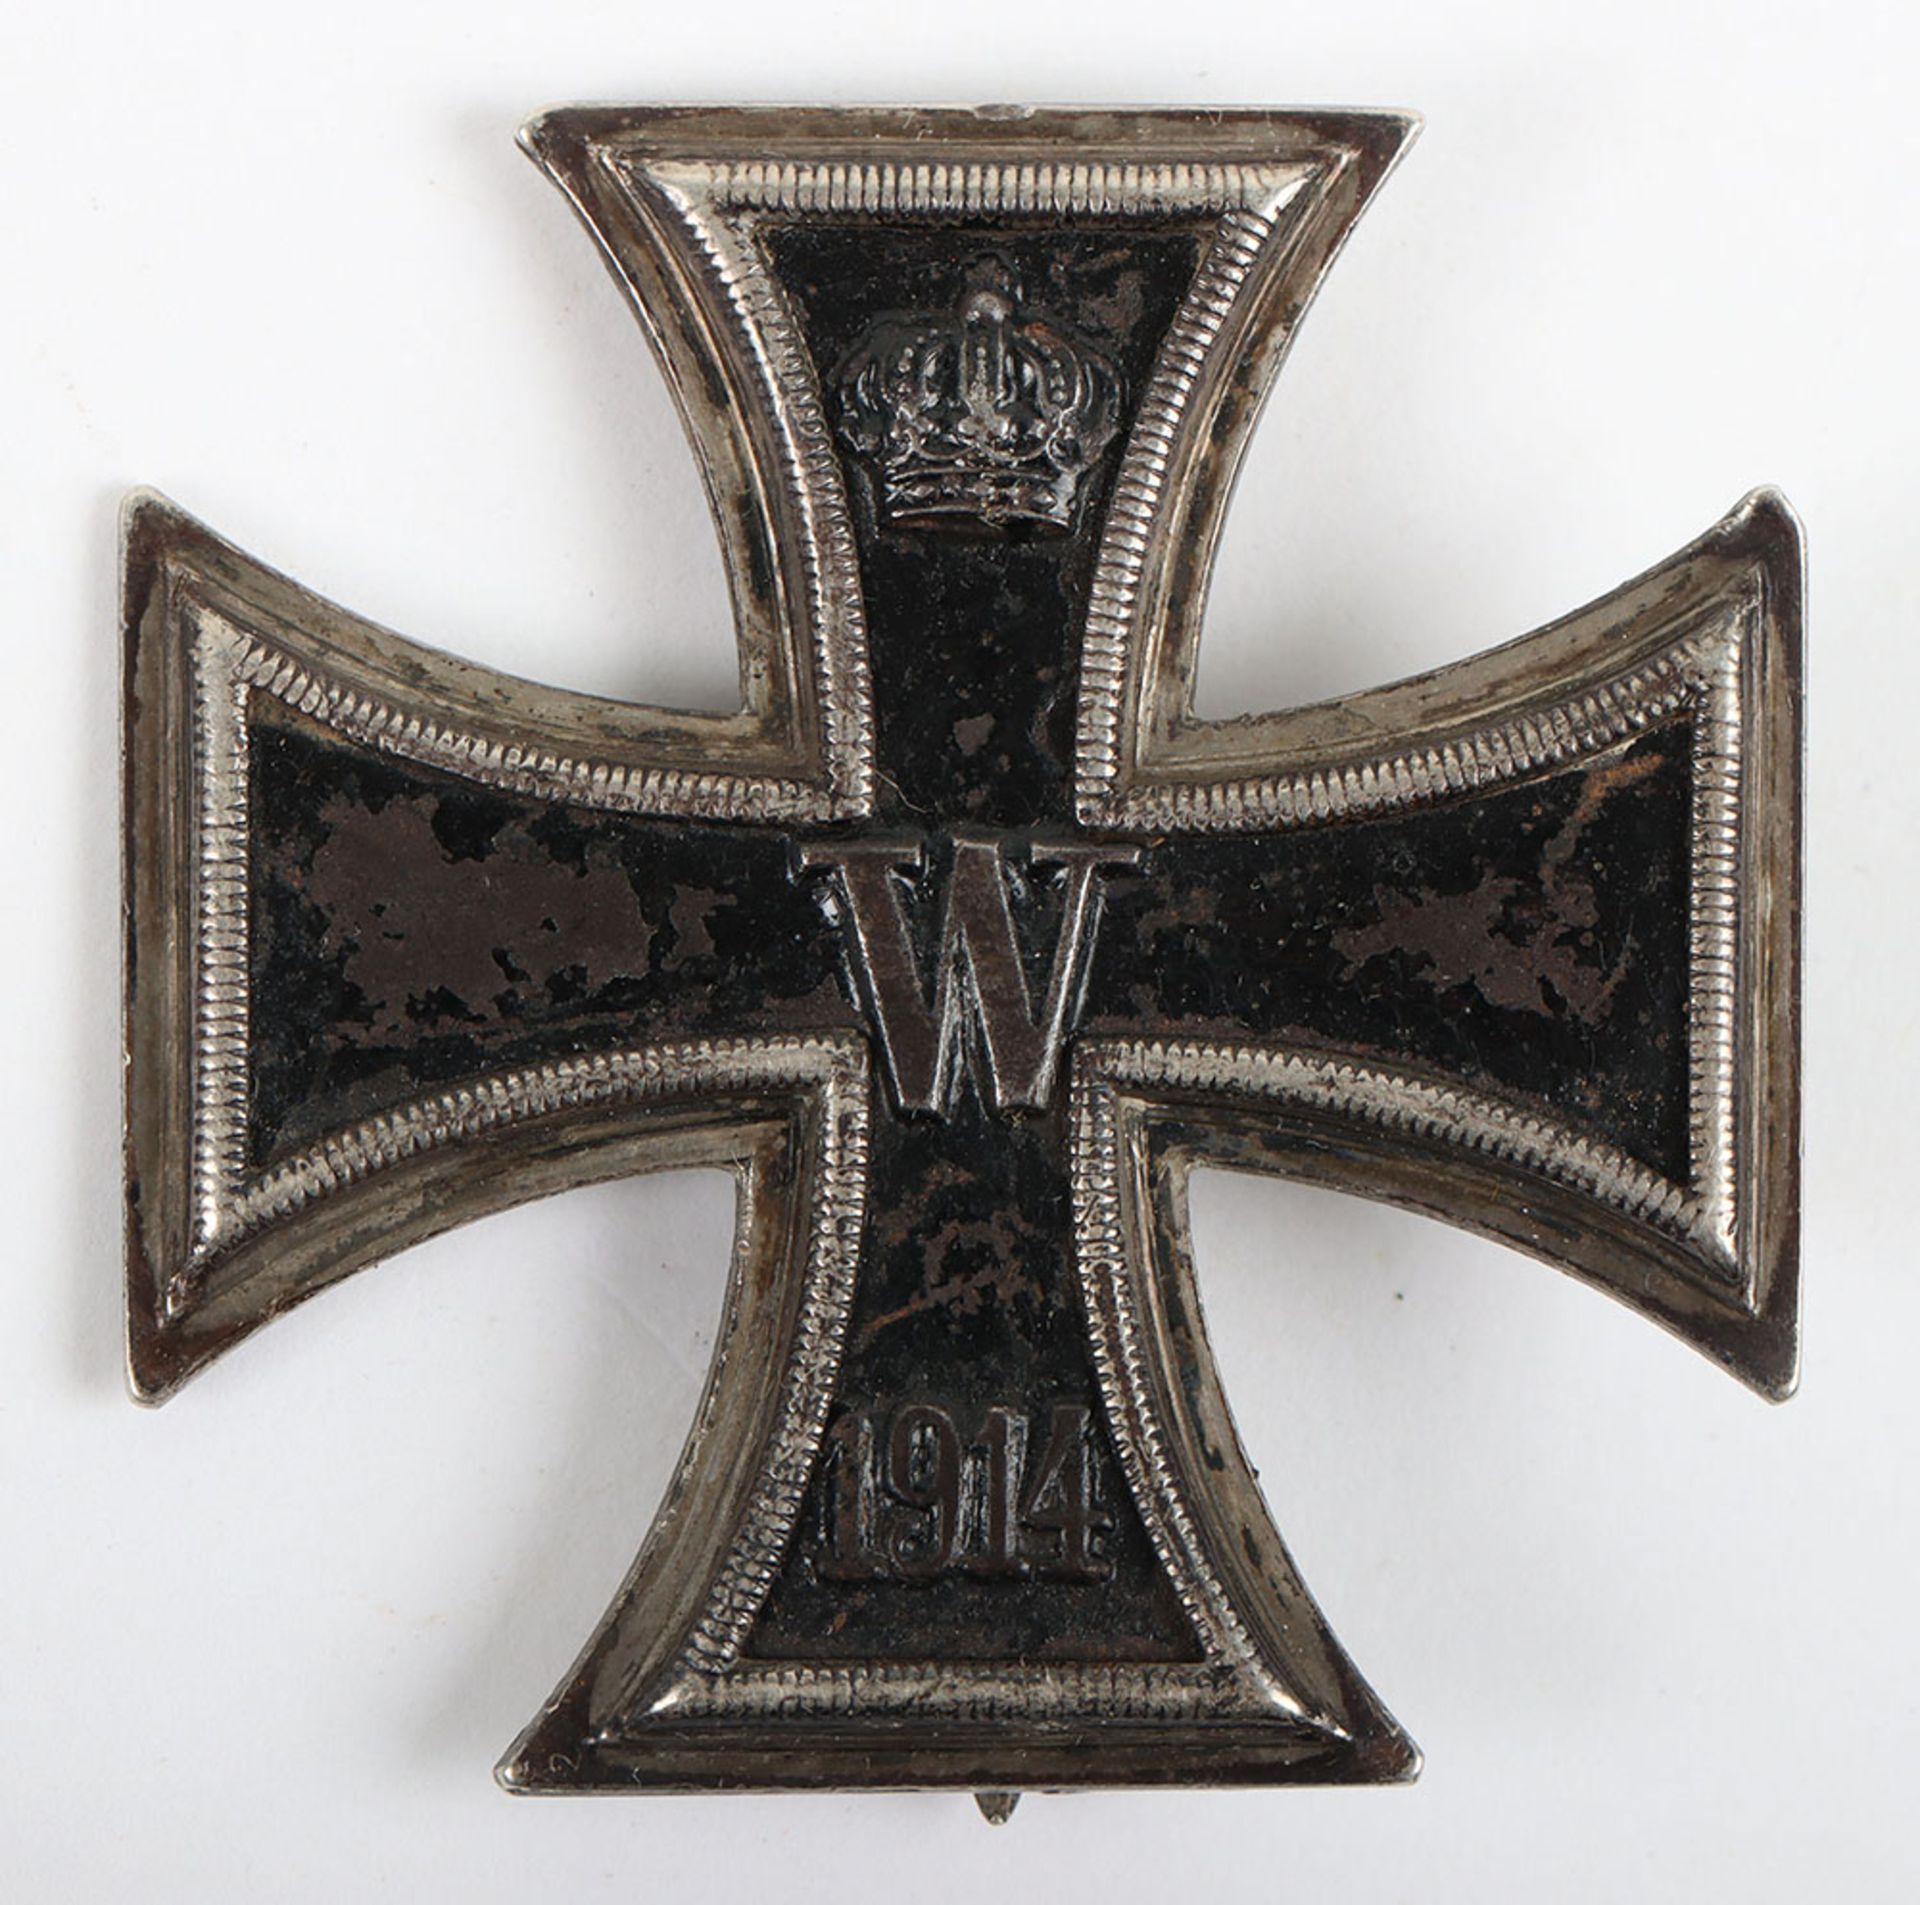 1914 Iron Cross 1st Class by KO with Case - Image 7 of 13